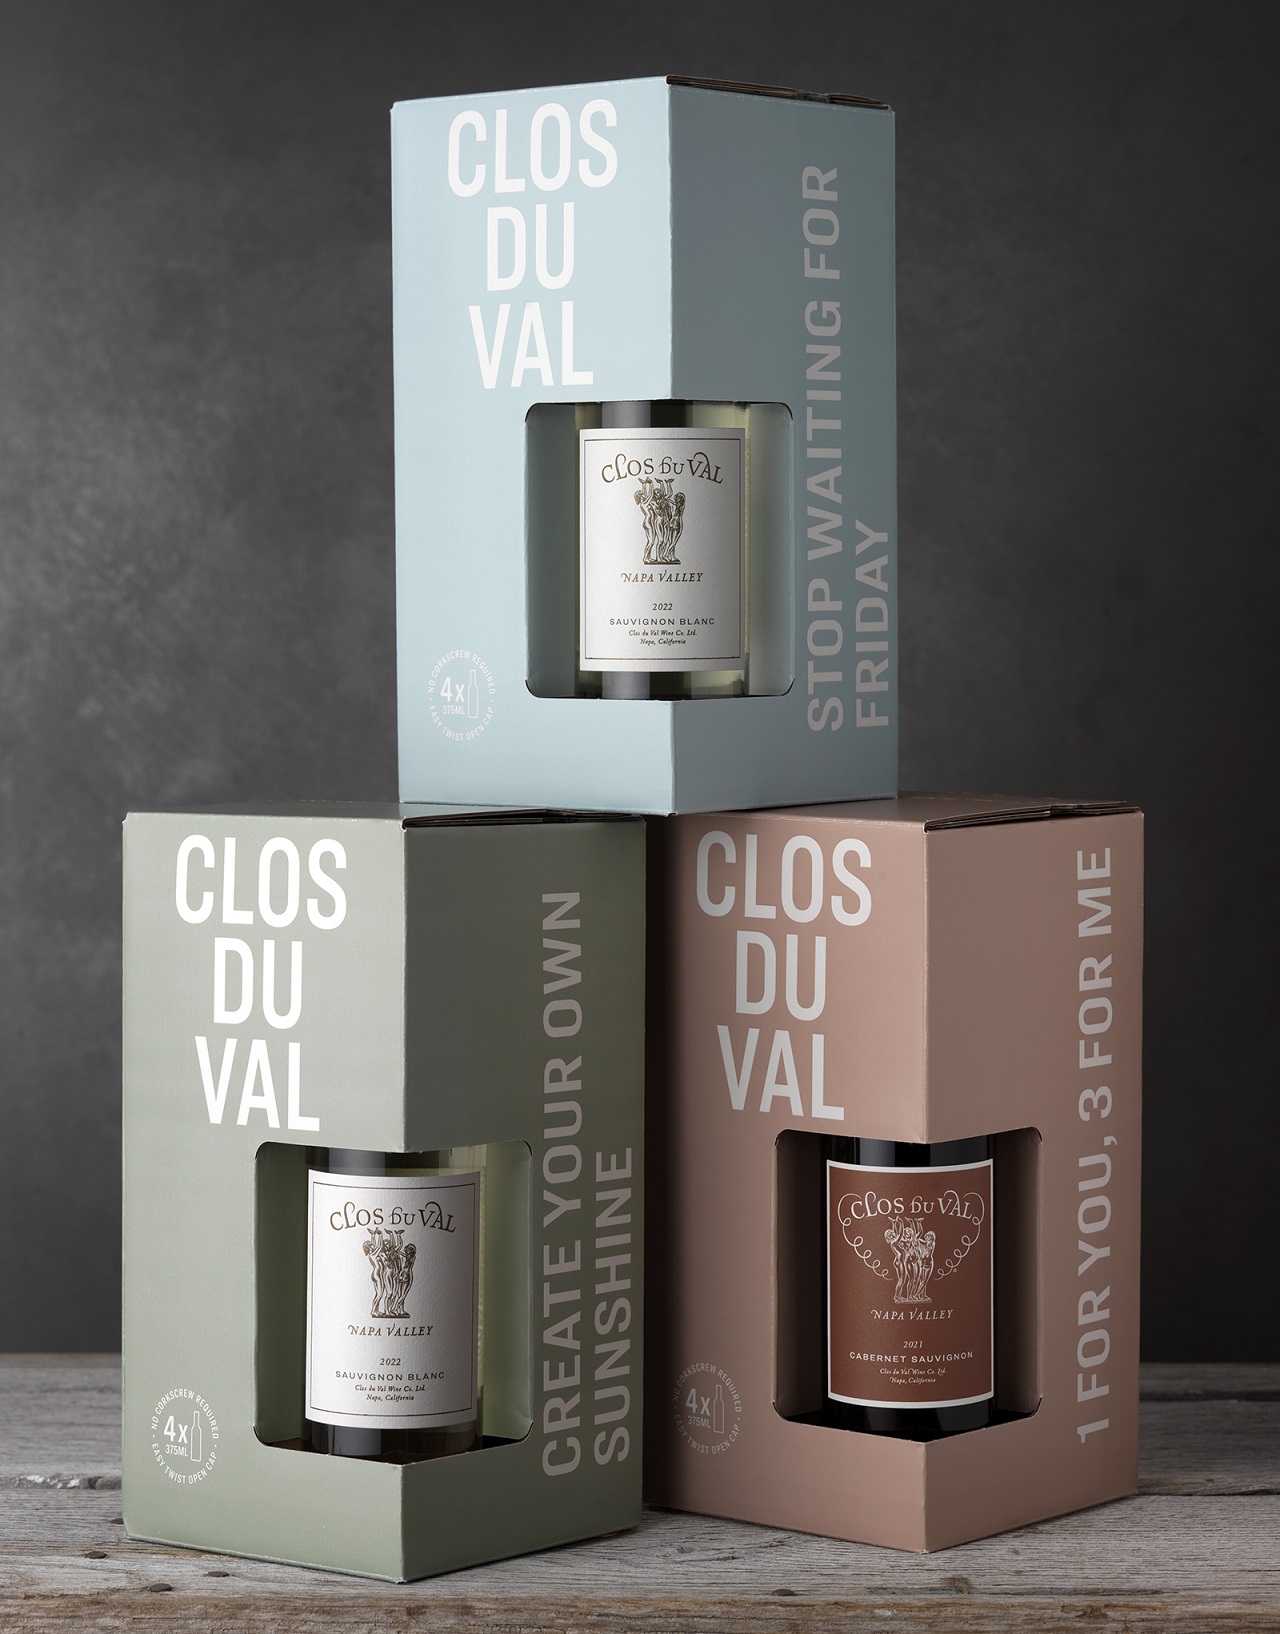 CF Napa Makes Fashionable Wine-to-Go Packaging for Clos du Val